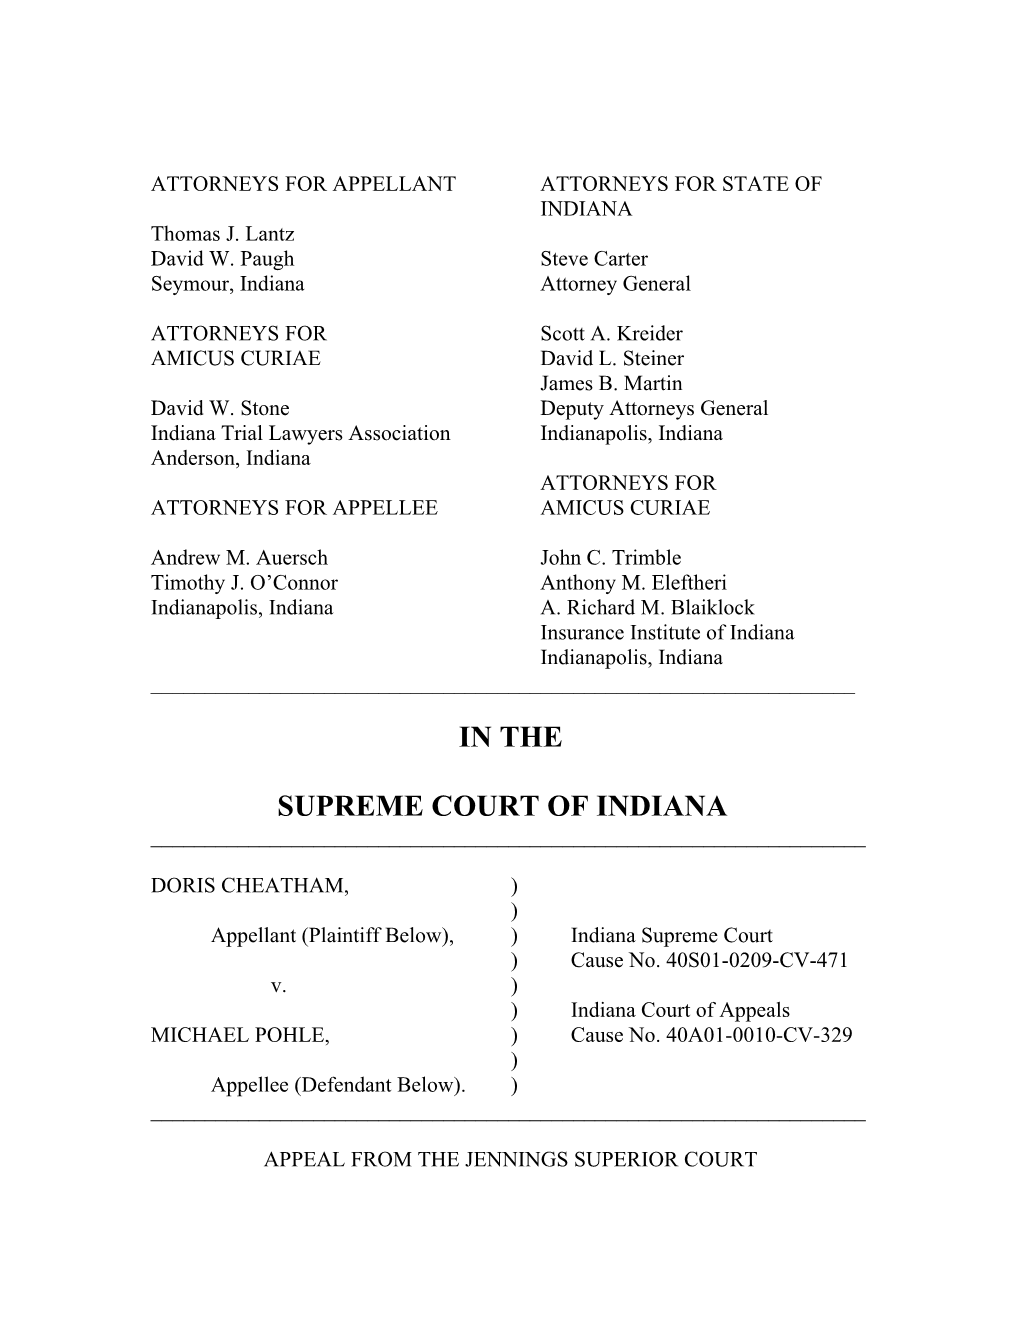 Attorneys for Appellant s8